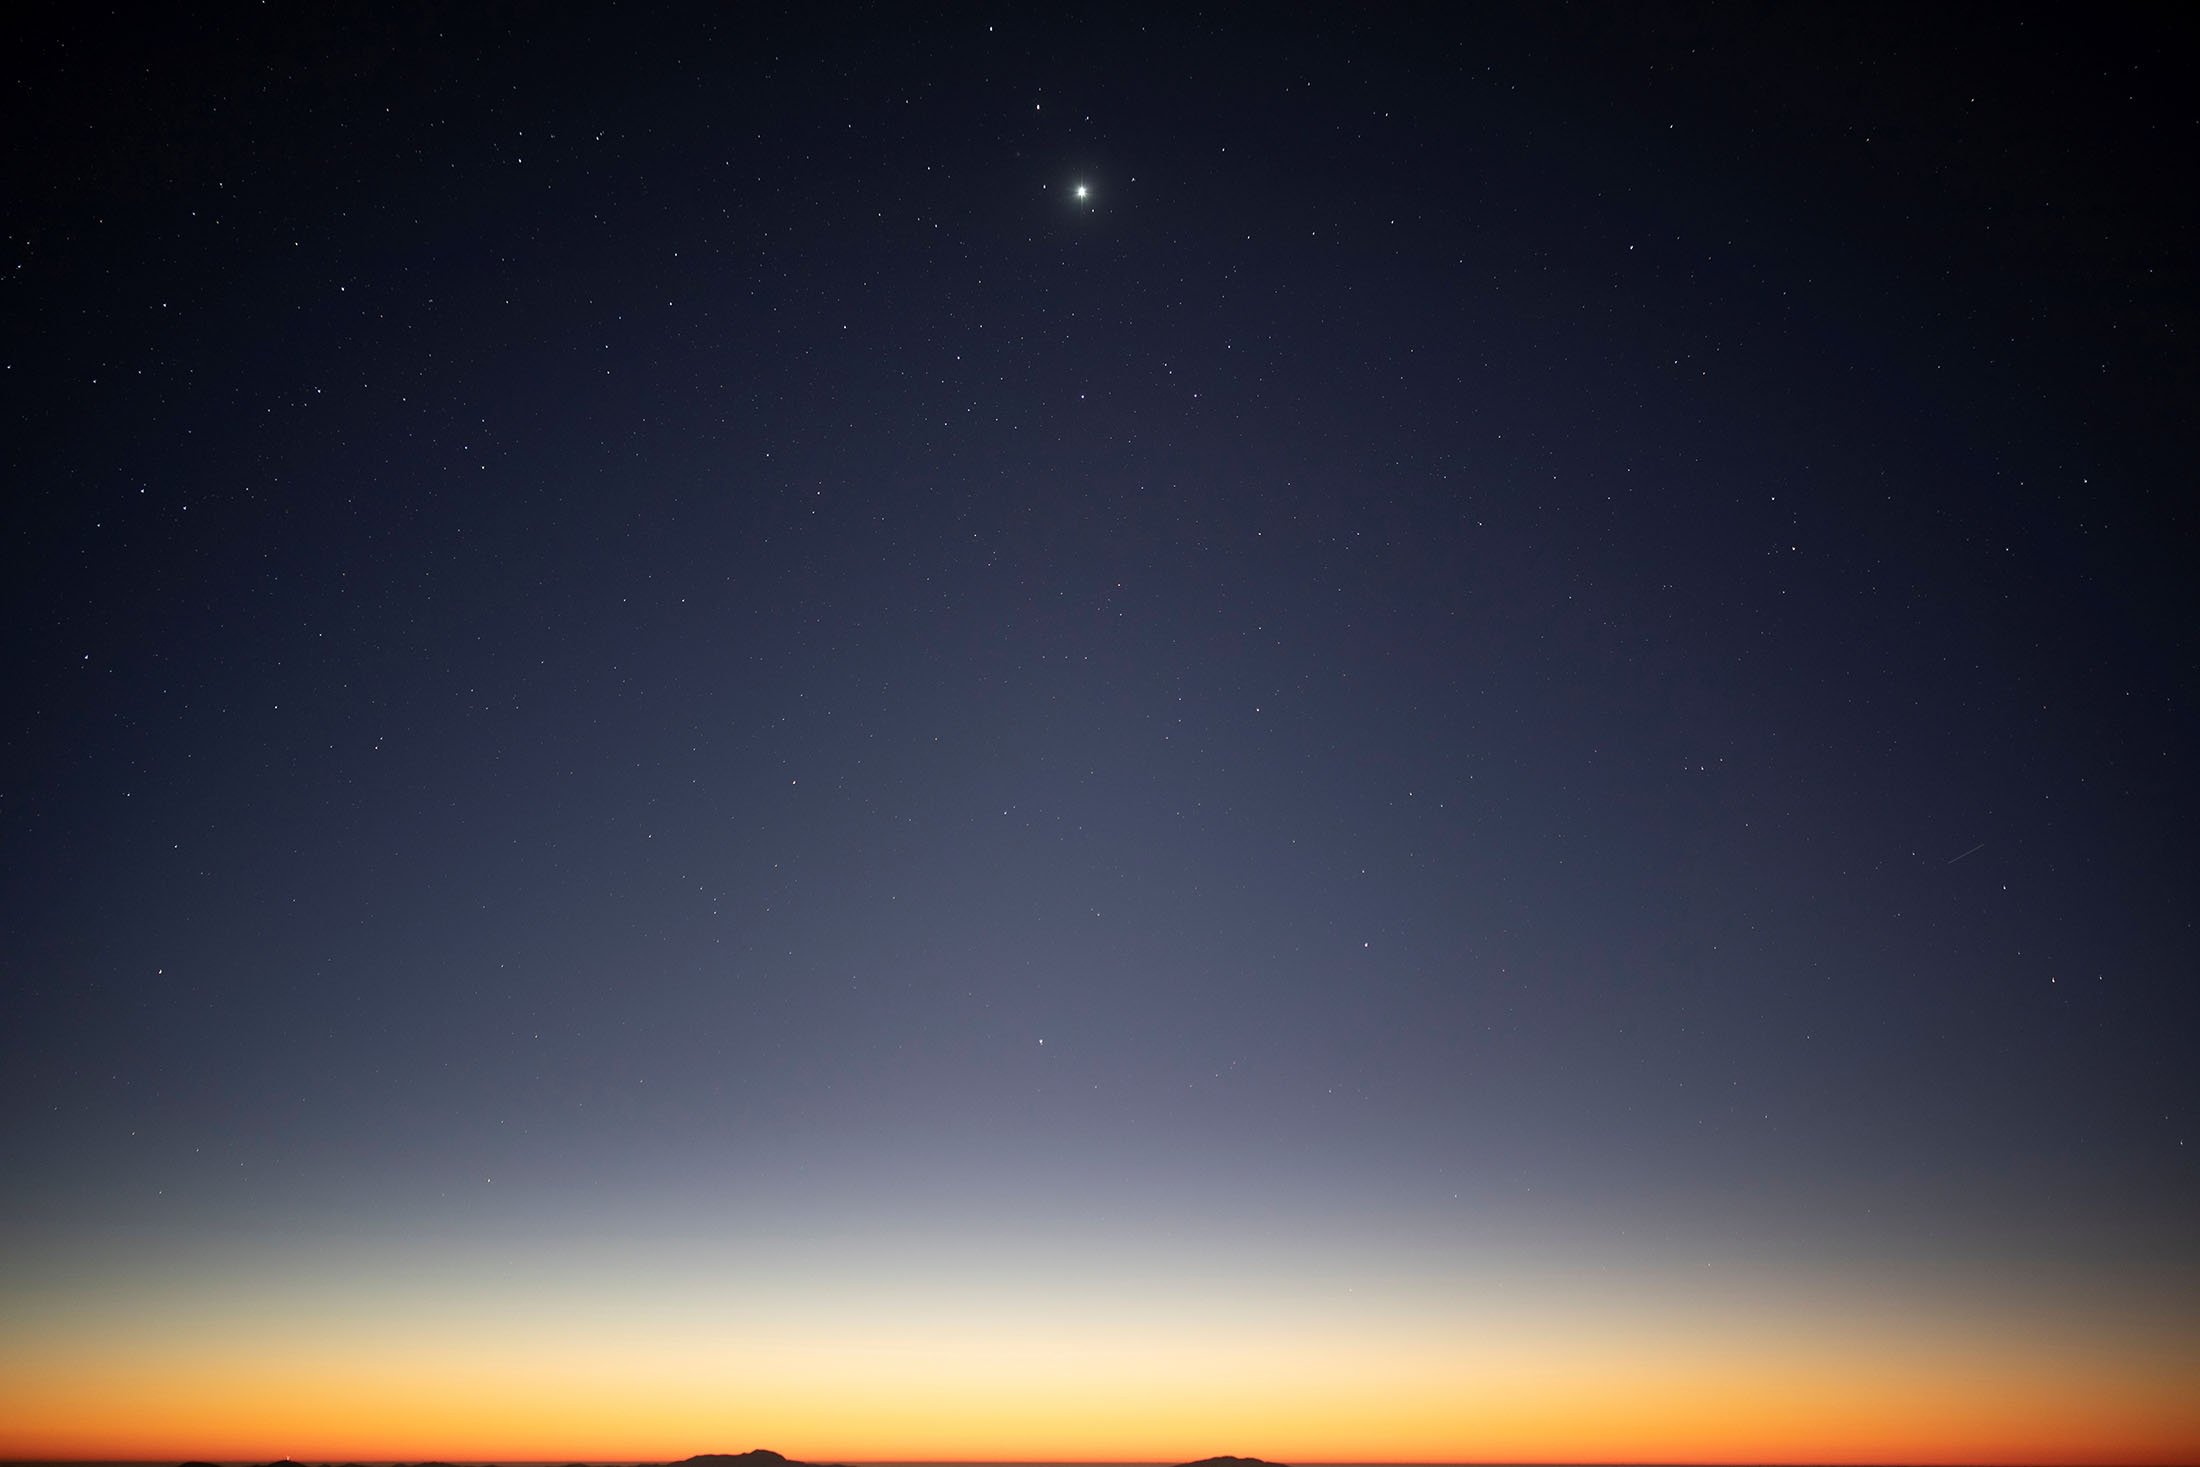 A view shows the sunset at Las Campanas Observatory, located in the Andes Mountains, in the Atacama Desert area, near Vallenar, Chile, Oct. 14, 2021. (Reuters Photo)